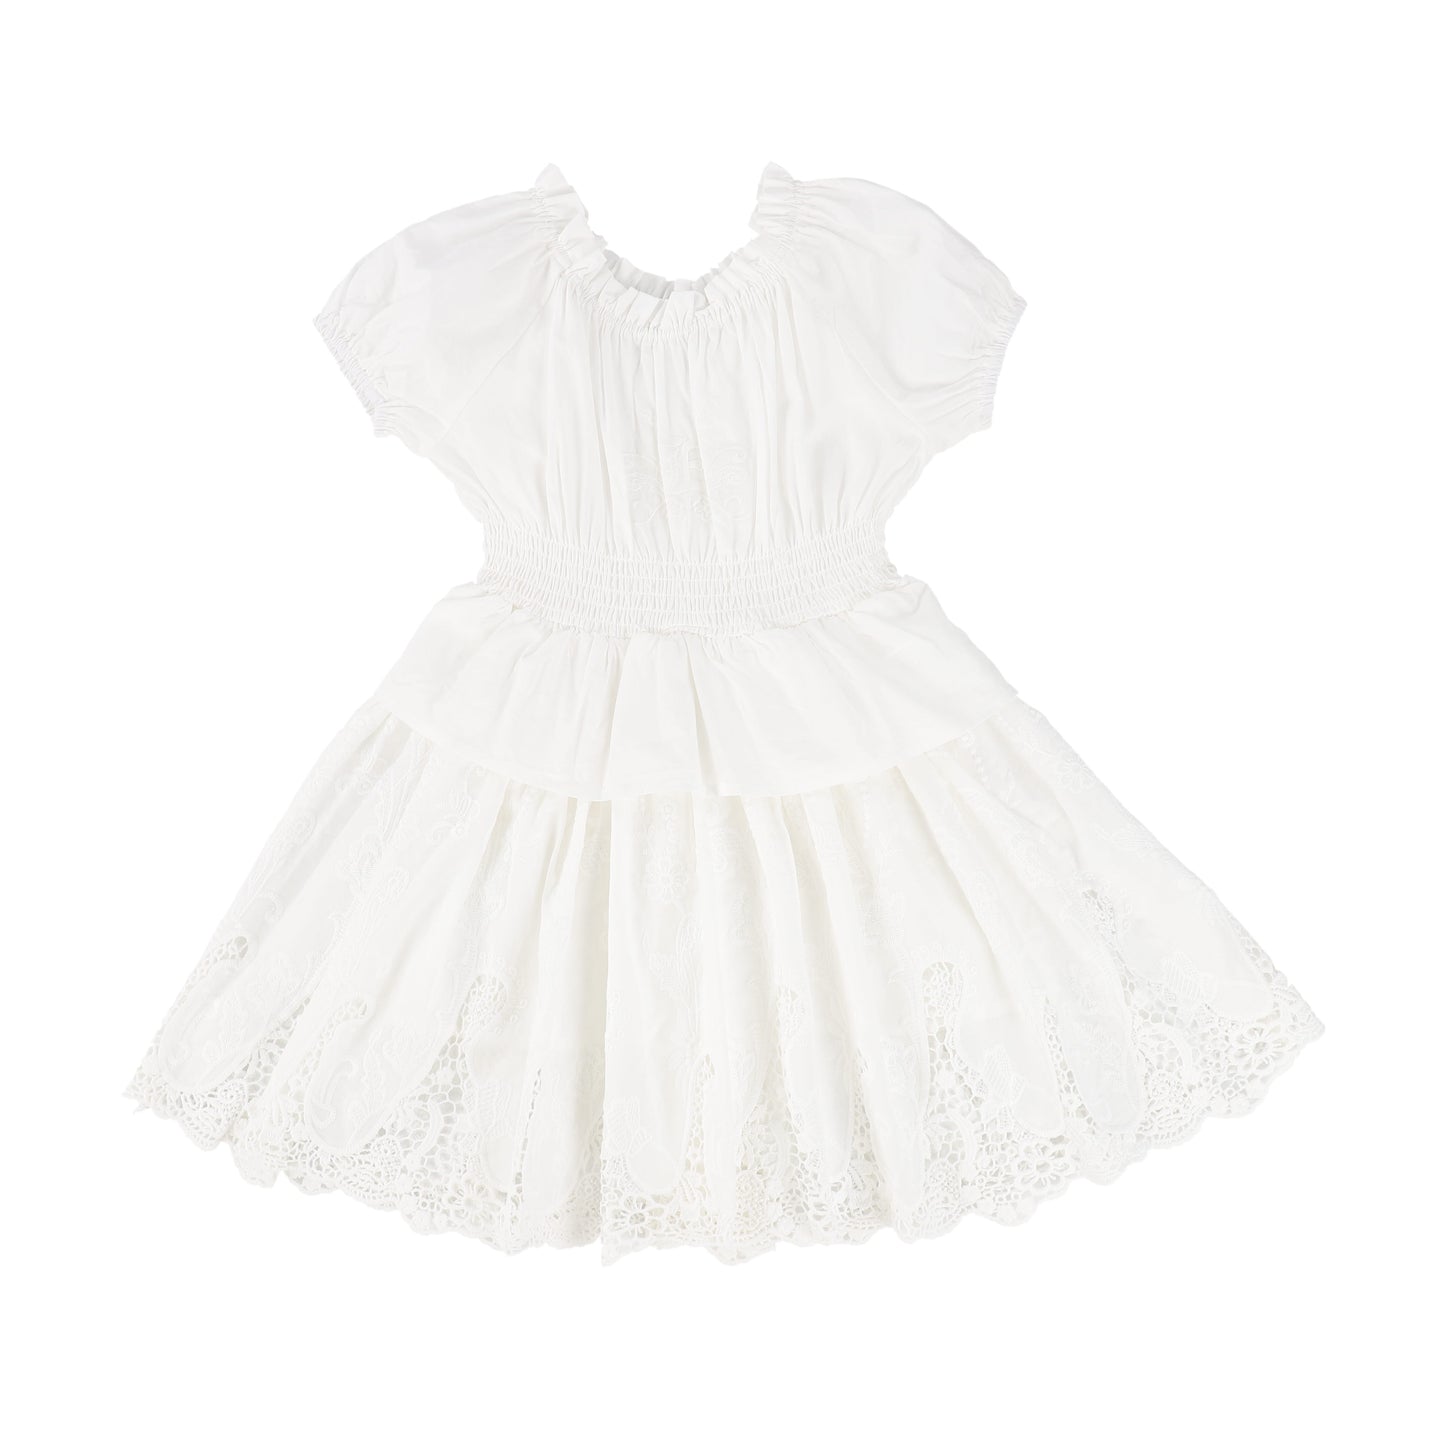 ERMANO SCERVINO IVORY LACE DETAIL SMOCKED LAYERED DRESS [Final Sale]